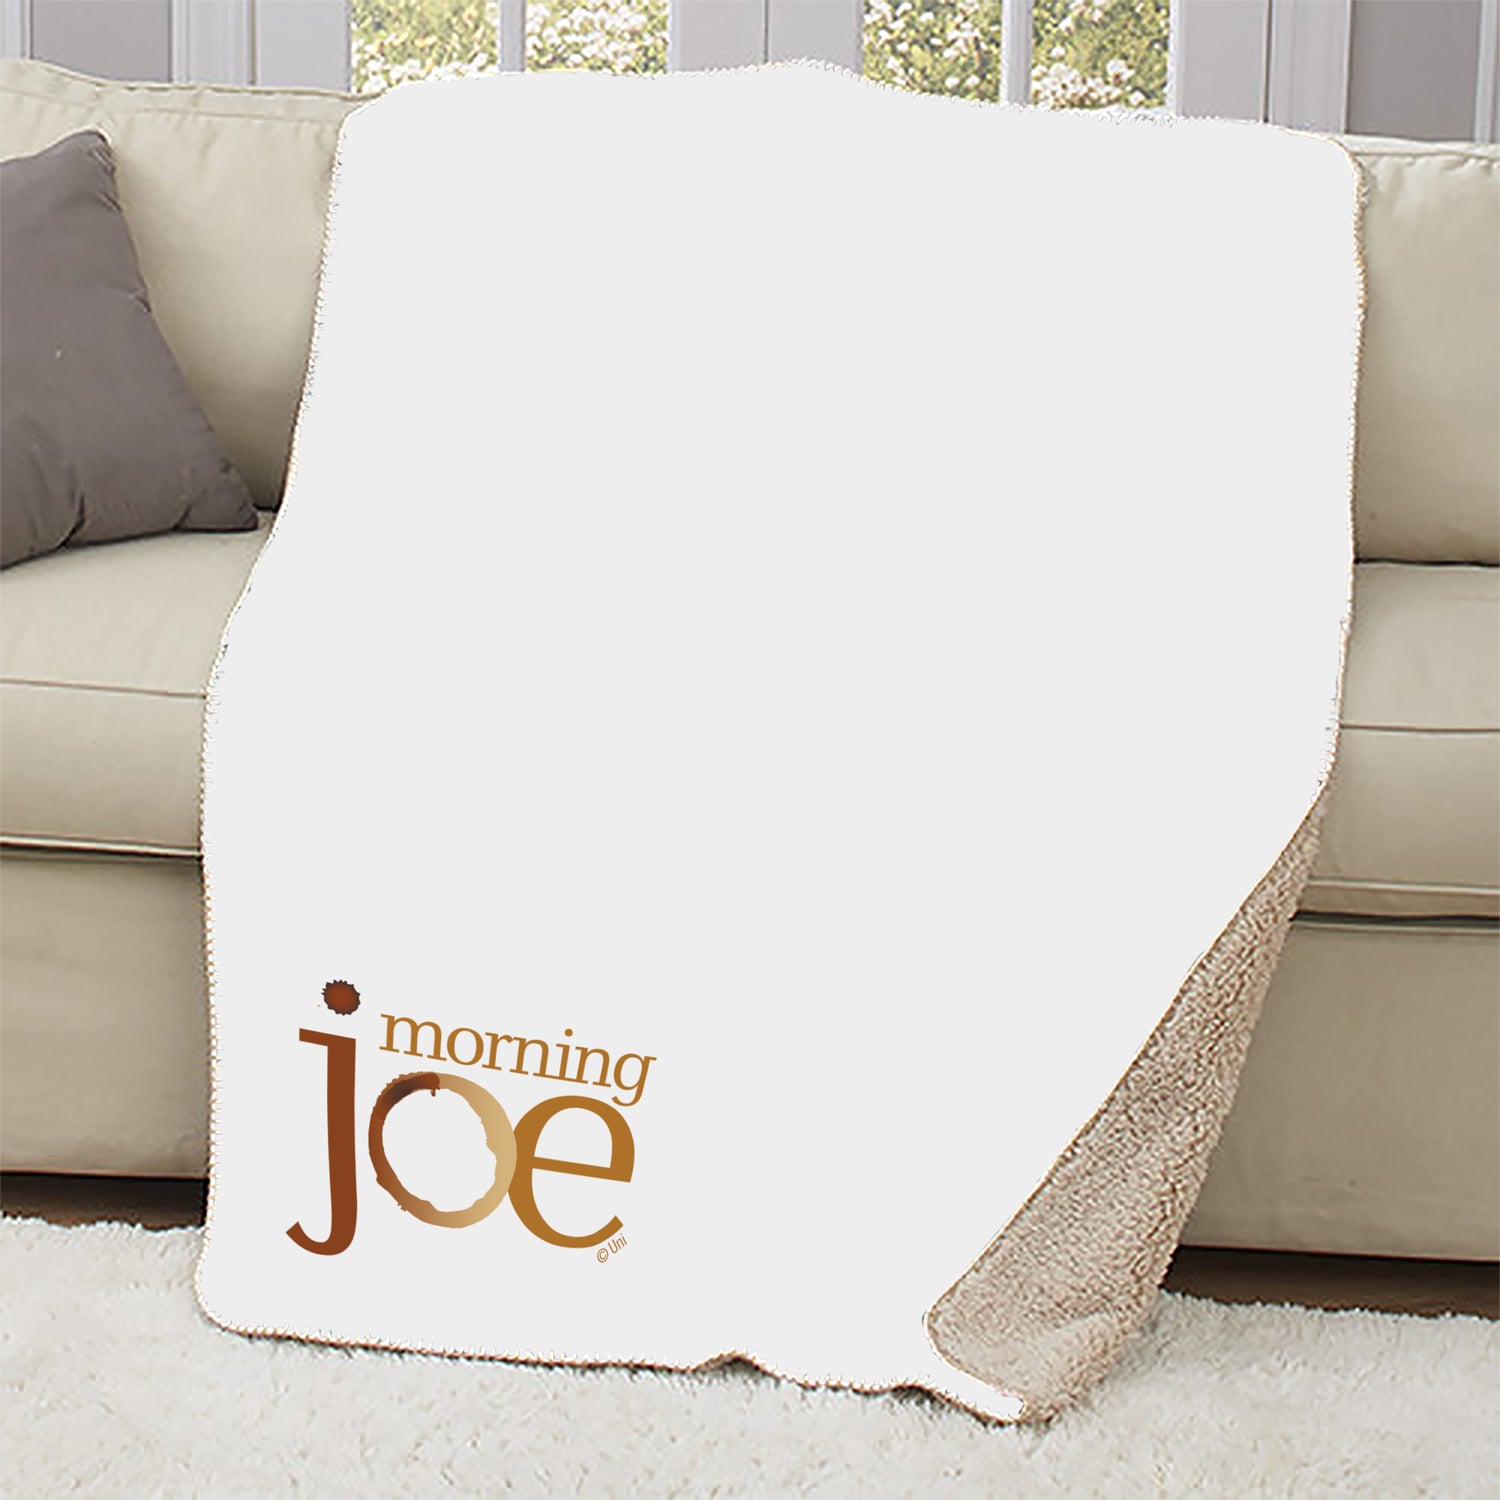 The Office Schrute Farms Sherpa Blanket – NBC Store